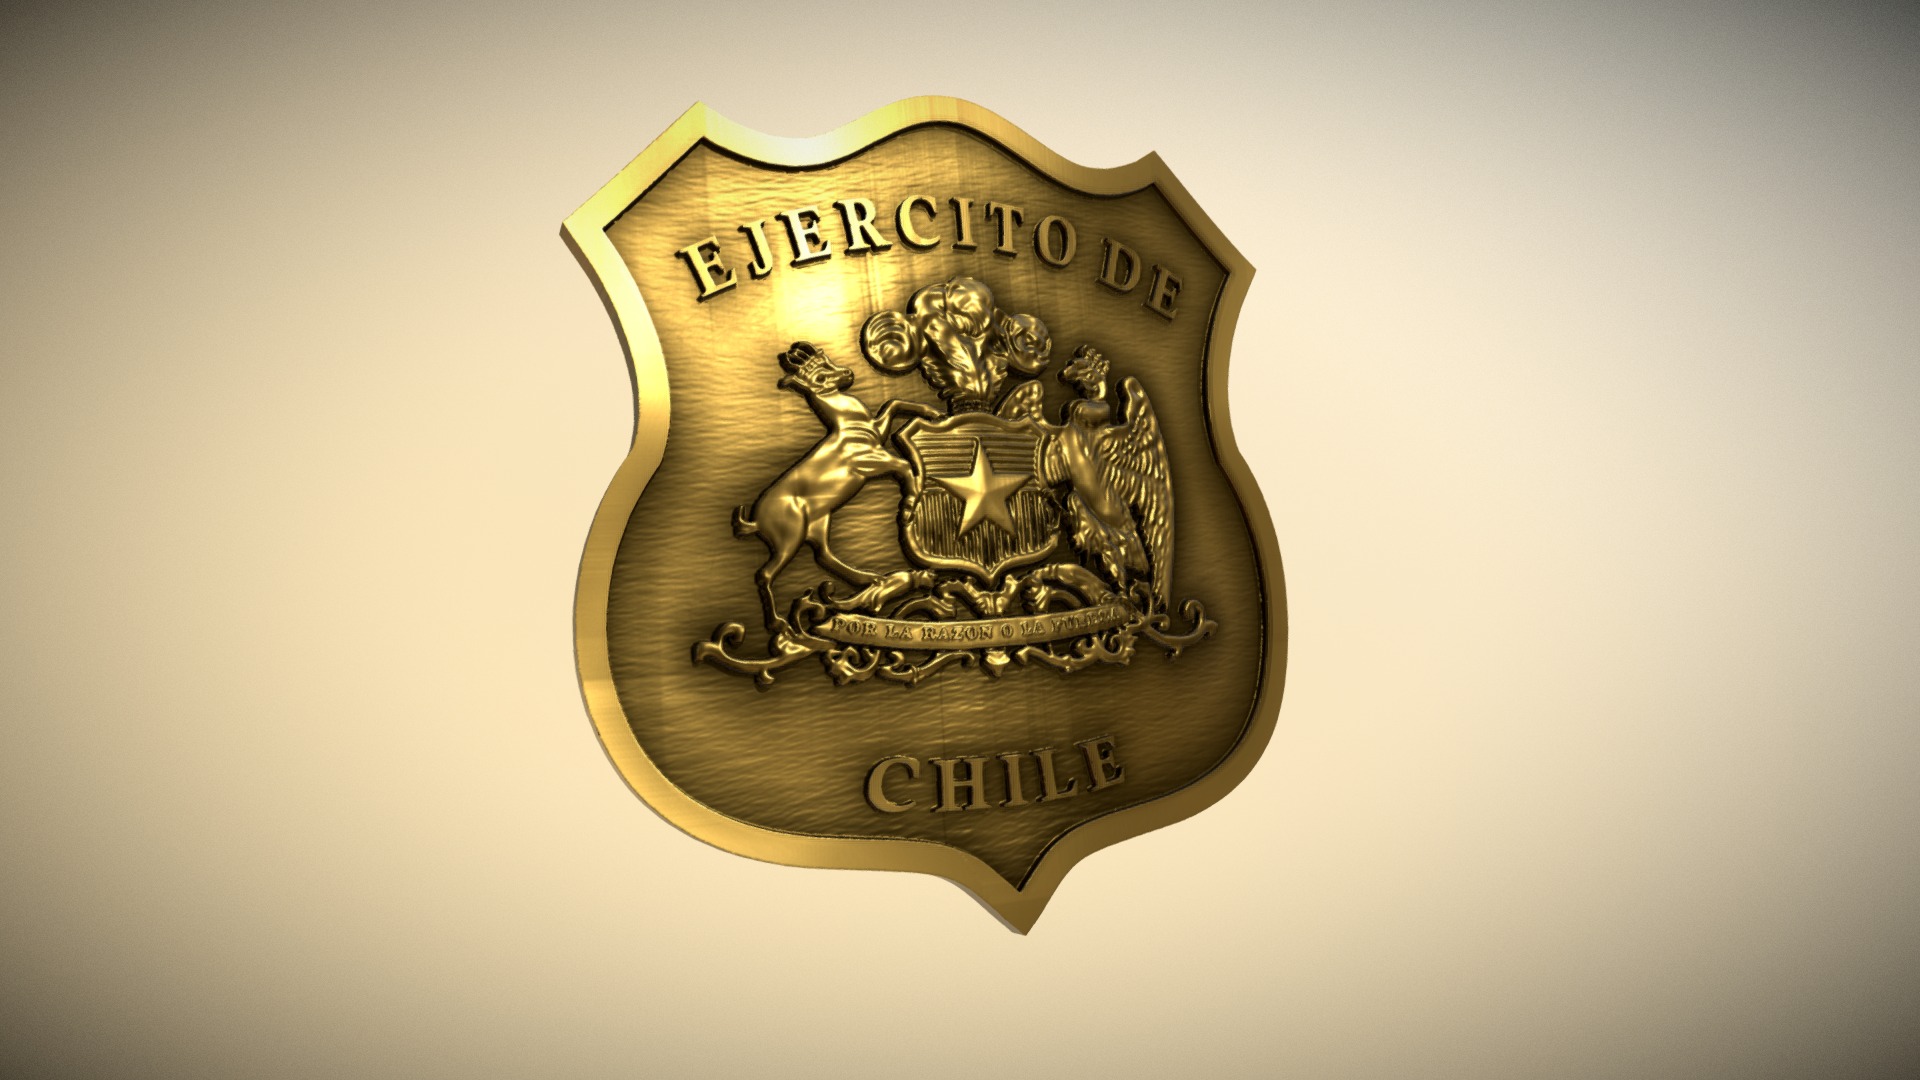 3D model Placa Ejercito de Chile - This is a 3D model of the Placa Ejercito de Chile. The 3D model is about a gold coin with a person on it.